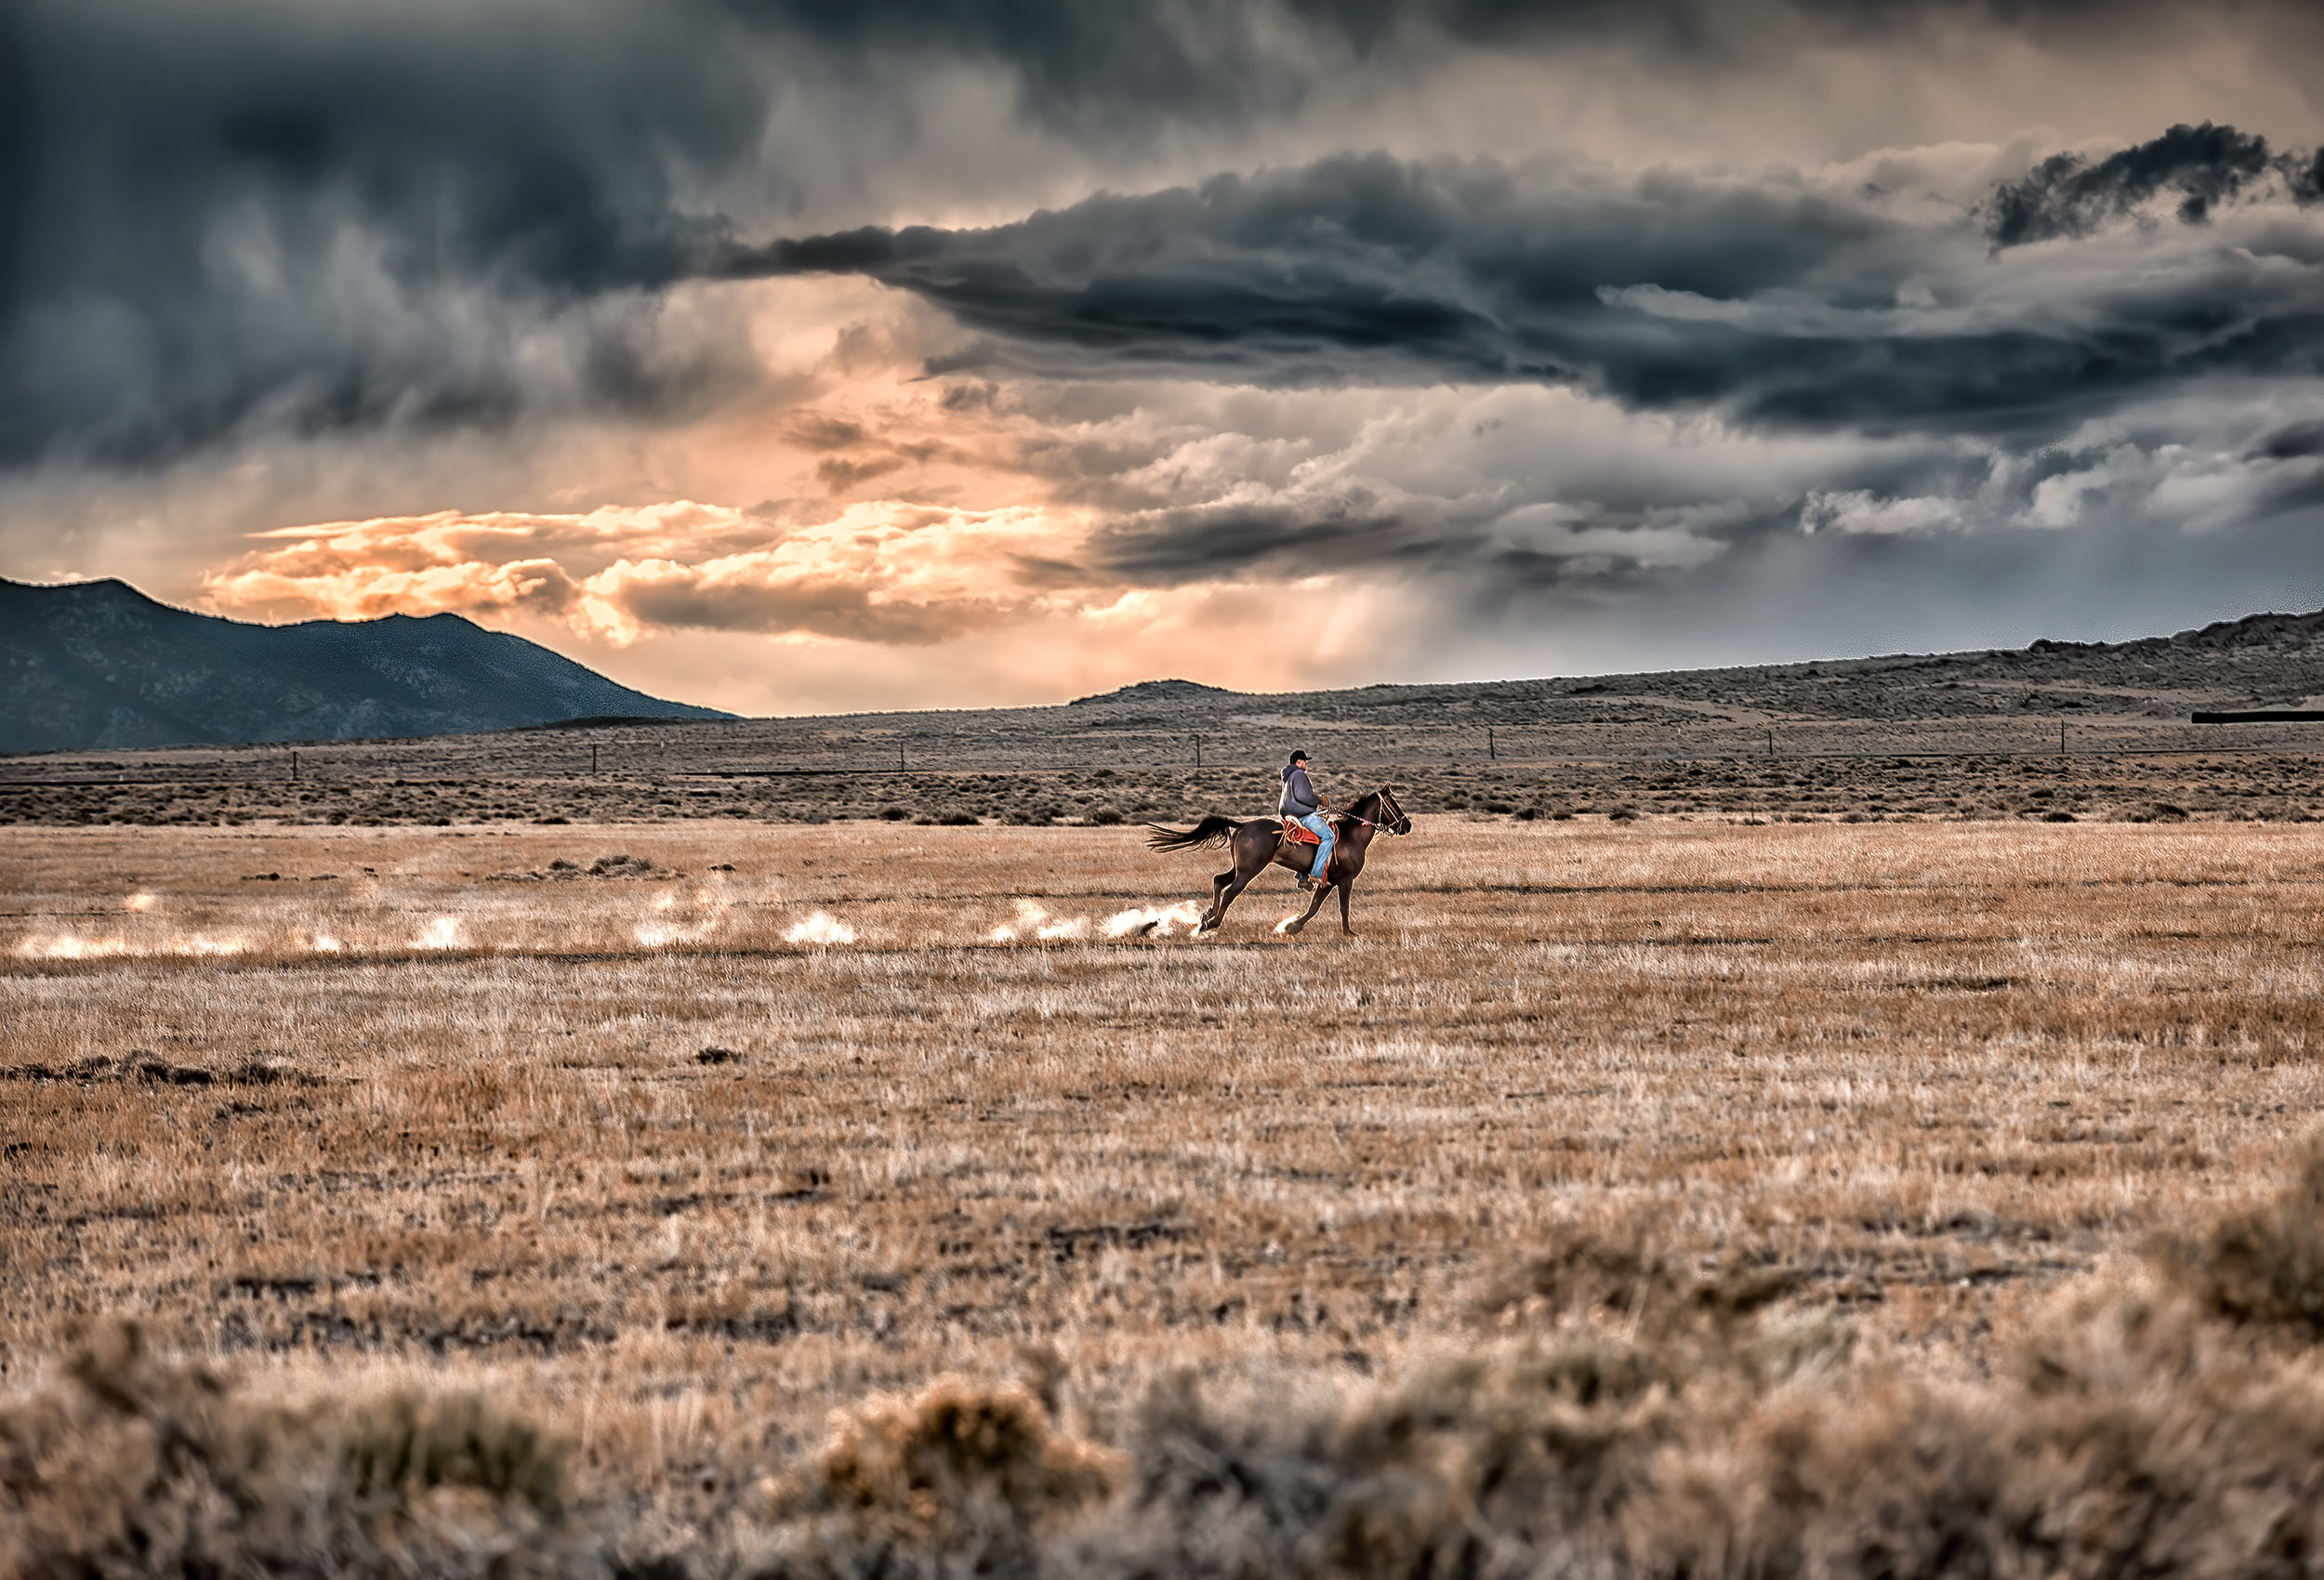 a man on horseback rushes home to beat an incoming summer storm in central nevada